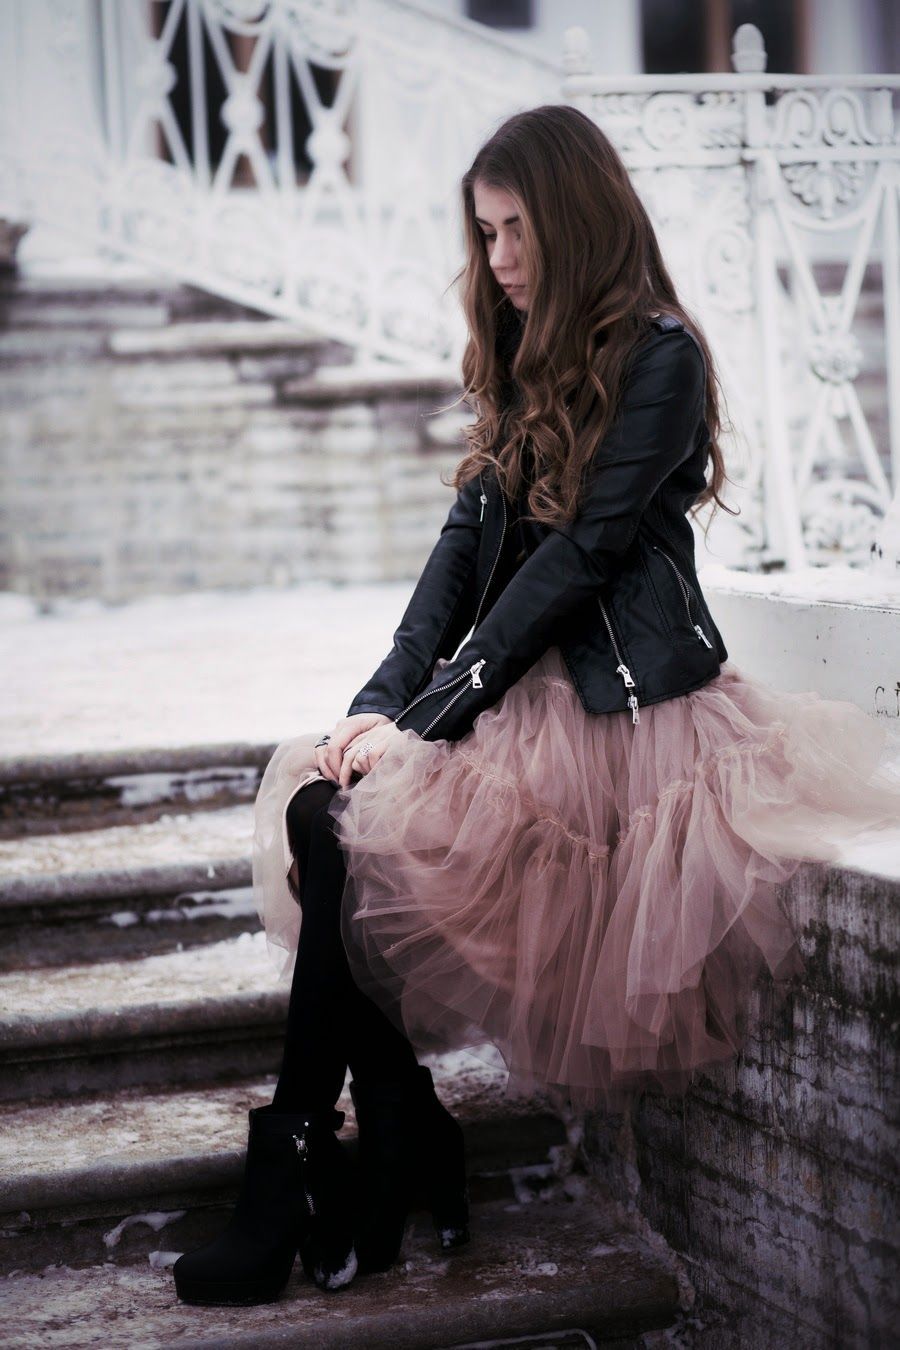 Hard and soft. Leather and tulle. Black and pink. A punk princess